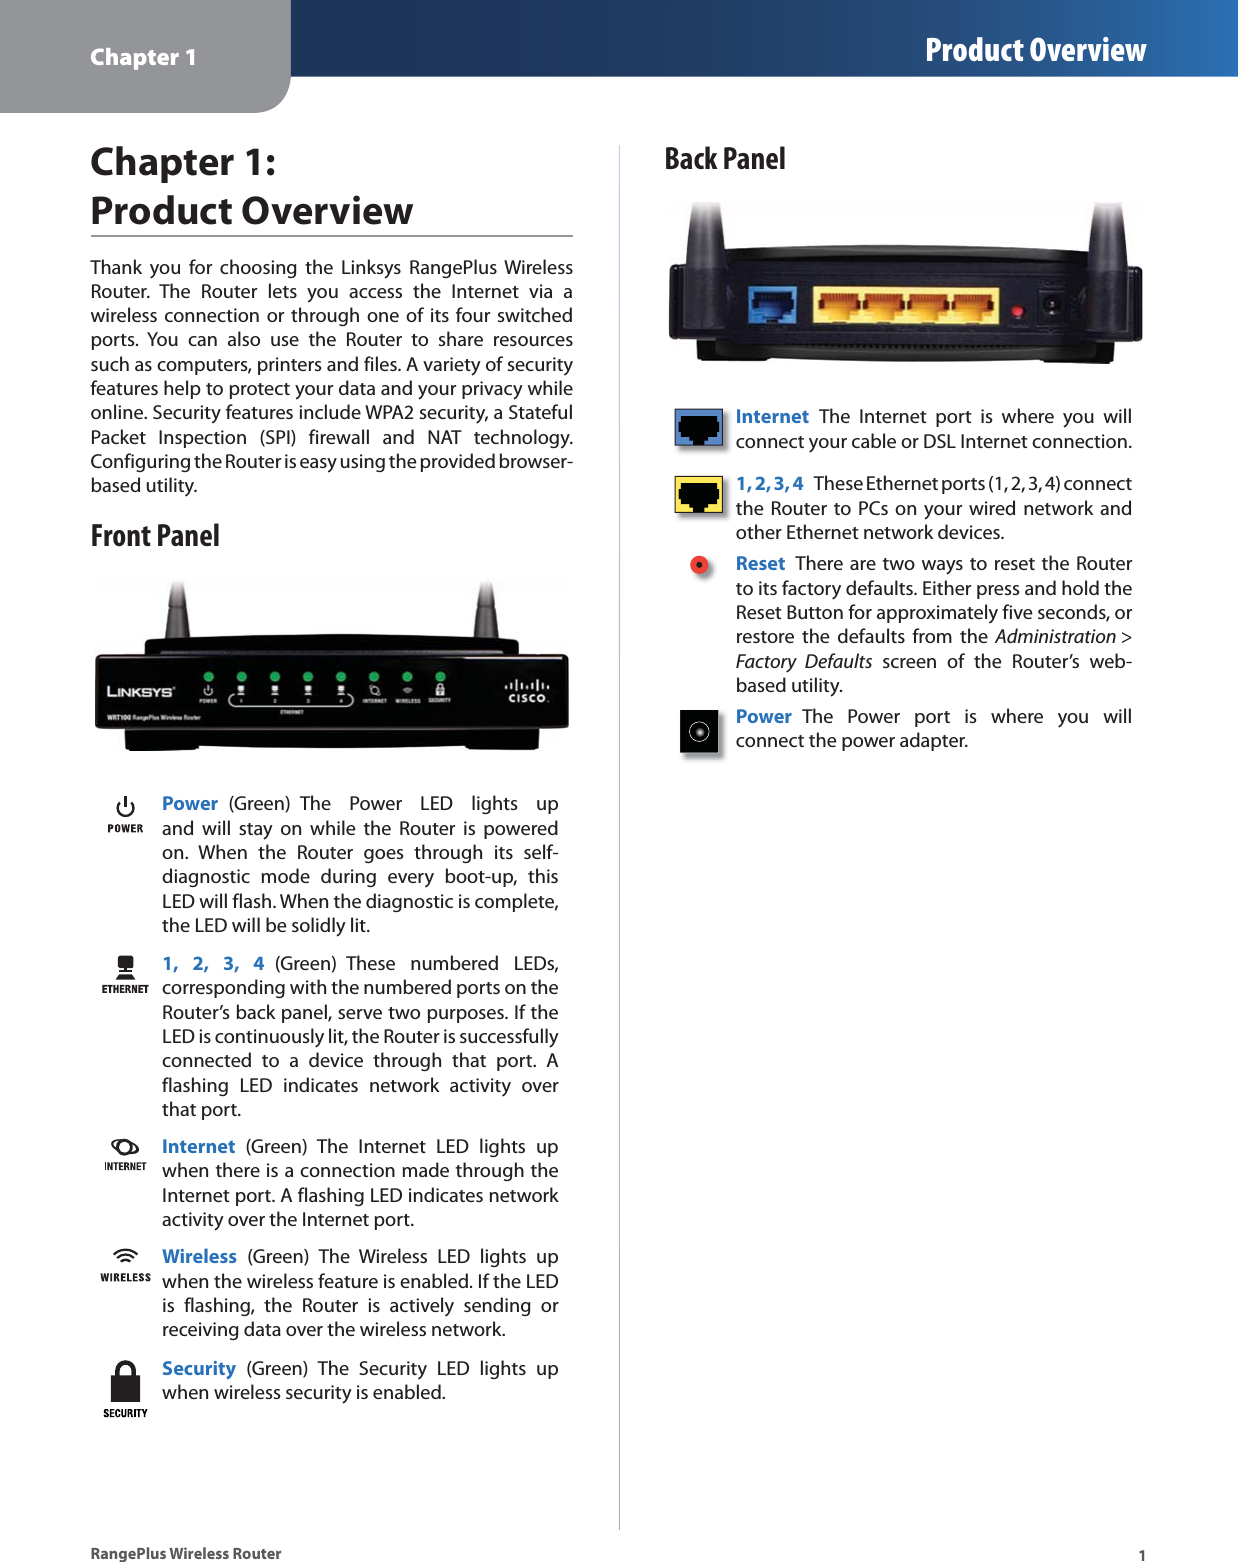 Chapter 1 Product Overview1RangePlus Wireless RouterChapter 1:Product OverviewThank you for choosing the Linksys RangePlus Wireless Router. The Router lets you access the Internet via a wireless connection or through one of its four switched ports. You can also use the Router to share resources such as computers, printers and files. A variety of security features help to protect your data and your privacy while online. Security features include WPA2 security, a Stateful Packet Inspection (SPI) firewall and NAT technology. Configuring the Router is easy using the provided browser-based utility.Front PanelPower (Green) The Power LED lights up and will stay on while the Router is powered on. When the Router goes through its self-diagnostic mode during every boot-up, this LED will flash. When the diagnostic is complete, the LED will be solidly lit.1, 2, 3, 4 (Green) These numbered LEDs, corresponding with the numbered ports on the Router’s back panel, serve two purposes. If the LED is continuously lit, the Router is successfully connected to a device through that port. A flashing LED indicates network activity over that port.Internet (Green) The Internet LED lights up when there is a connection made through the Internet port. A flashing LED indicates network activity over the Internet port.Wireless (Green) The Wireless LED lights up when the wireless feature is enabled. If the LED is flashing, the Router is actively sending or receiving data over the wireless network.Security (Green) The Security LED lights up when wireless security is enabled.Back PanelInternet The Internet port is where you will connect your cable or DSL Internet connection. 1, 2, 3, 4 These Ethernet ports (1, 2, 3, 4) connect the Router to PCs on your wired network and other Ethernet network devices. Reset There are two ways to reset the Router to its factory defaults. Either press and hold the Reset Button for approximately five seconds, or restore the defaults from the Administration &gt;Factory Defaults screen of the Router’s web-based utility. Power The Power port is where you will  connect the power adapter.